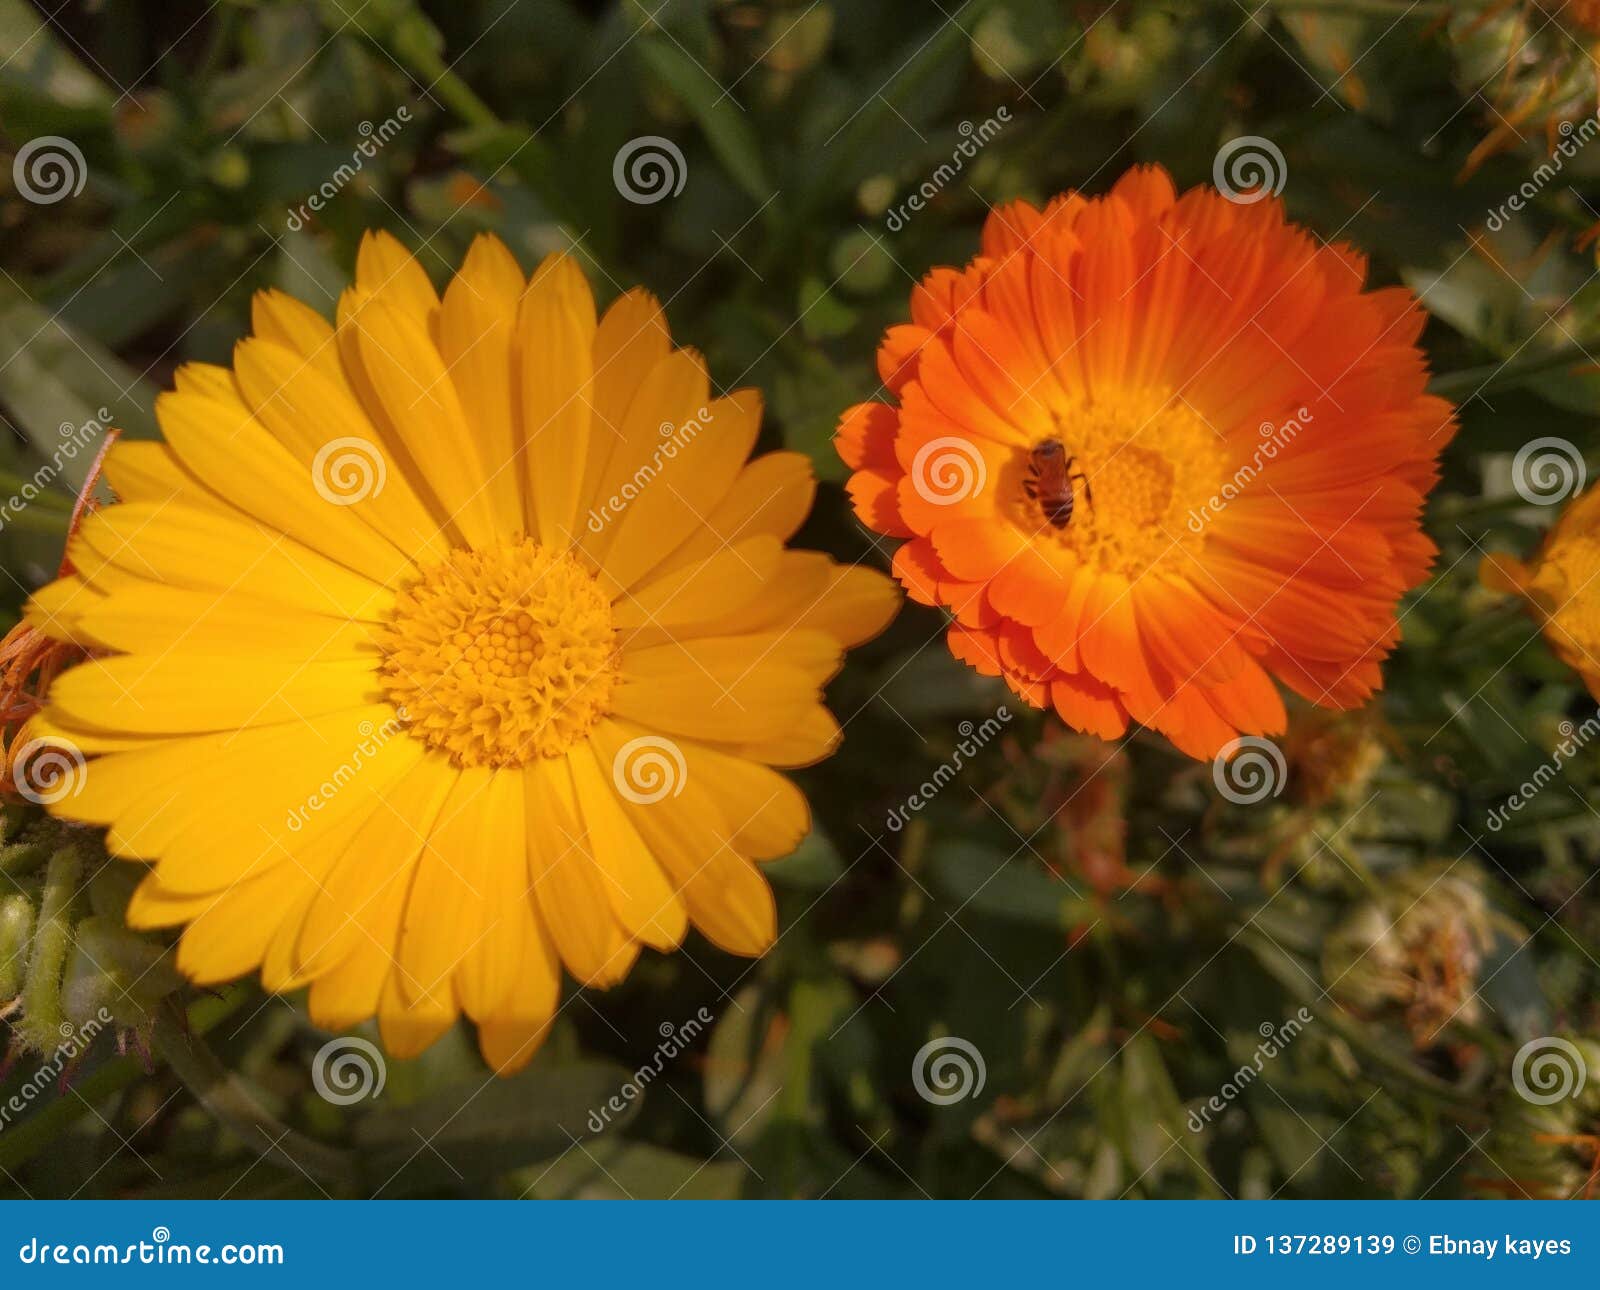 Flowers stock image. Image of flowers, miniature, green - 137289139